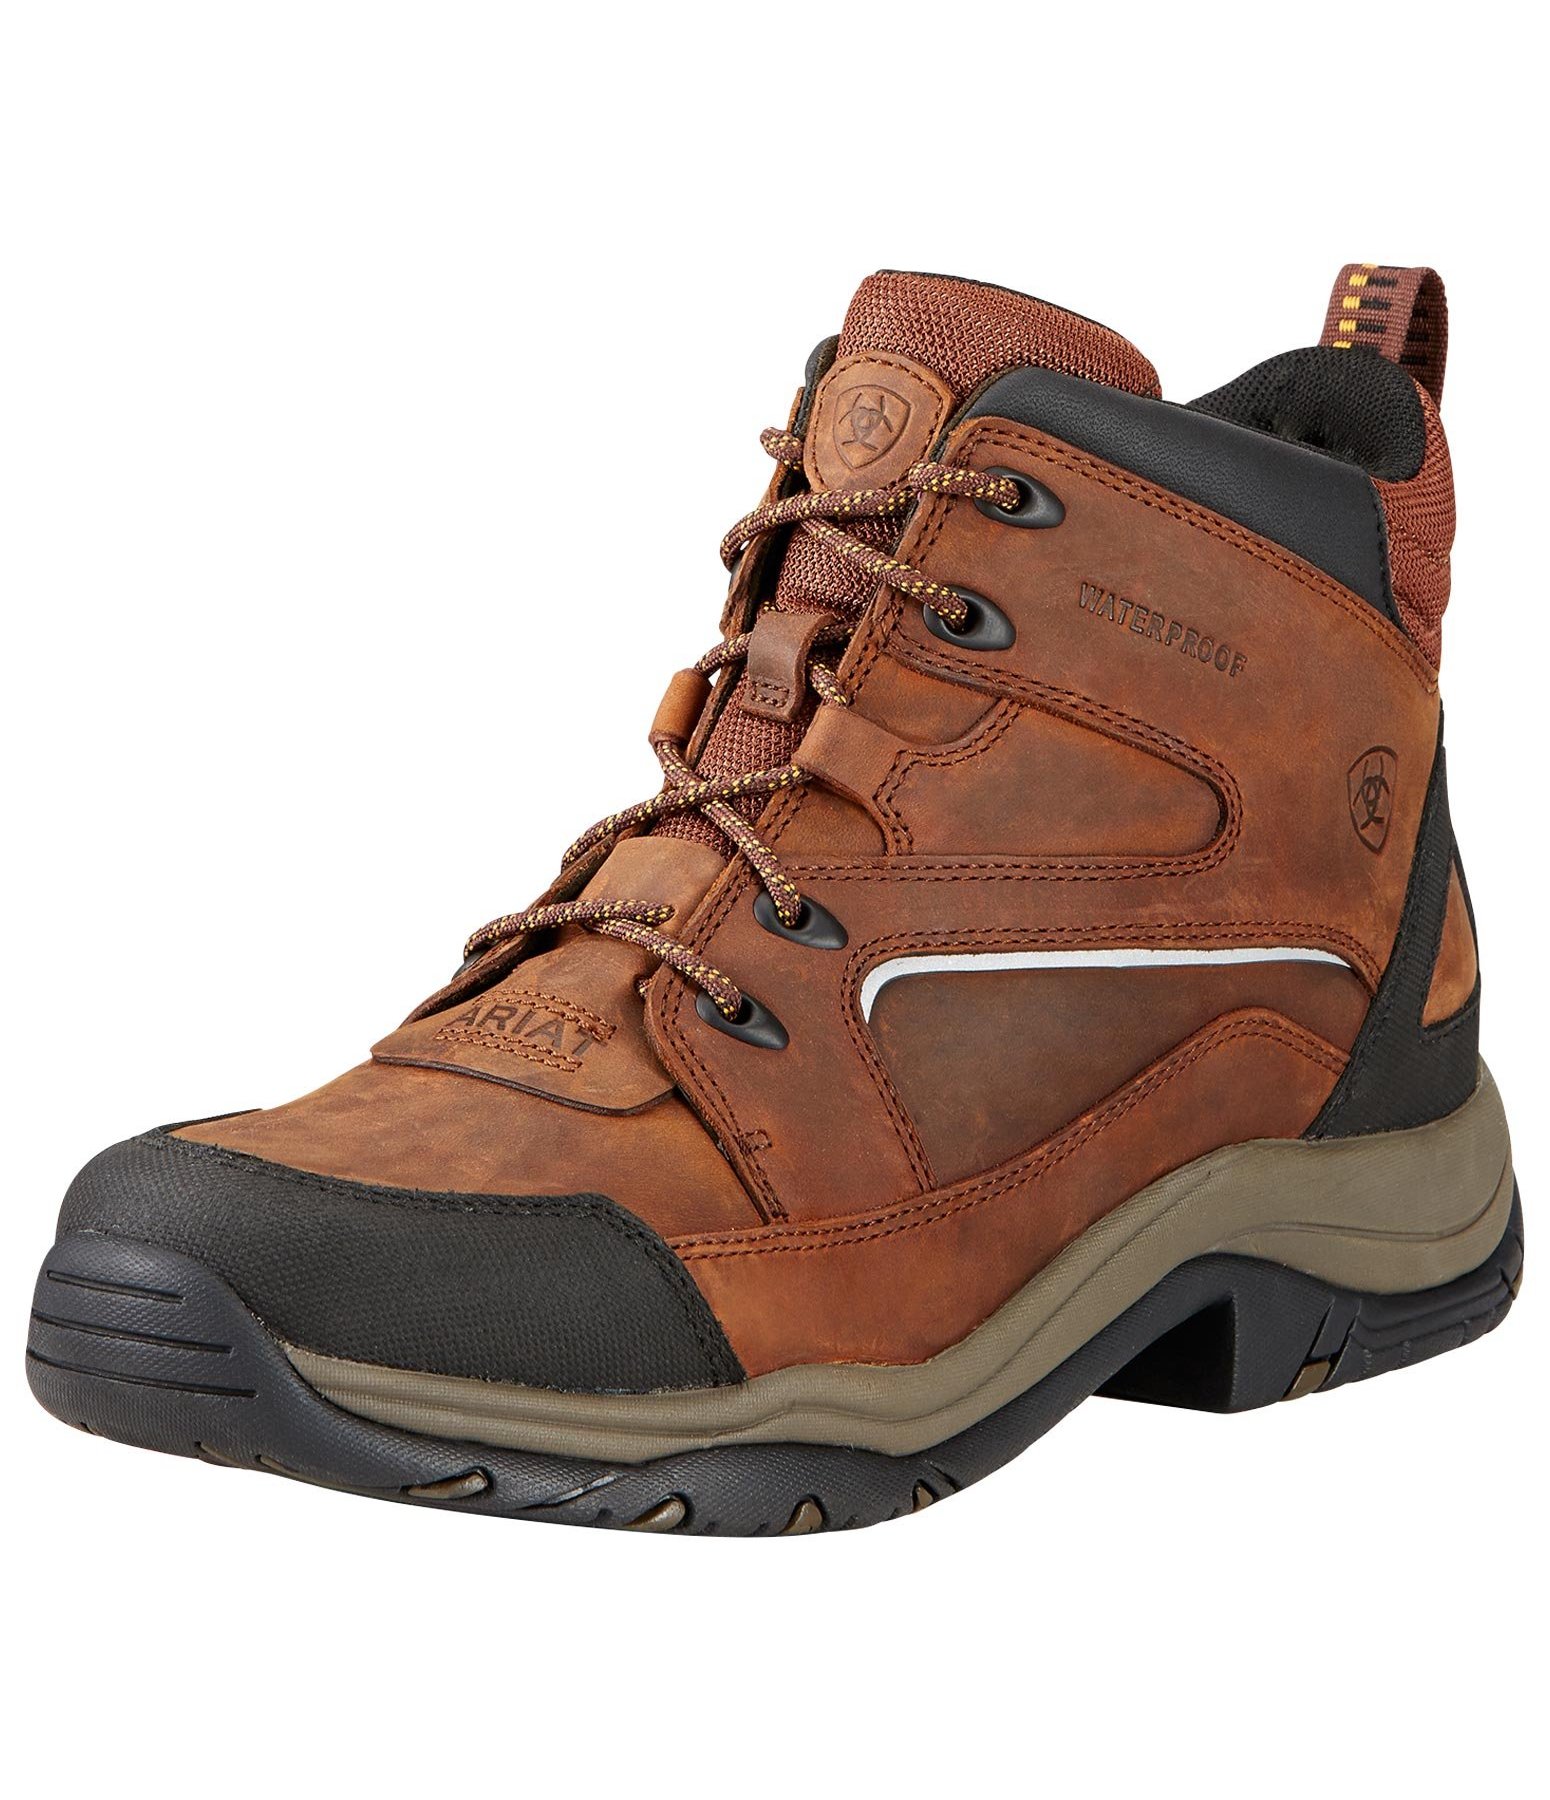 Men's Riding Boots Telluride II H 2 O - Riding Boots & Yard Boots ...